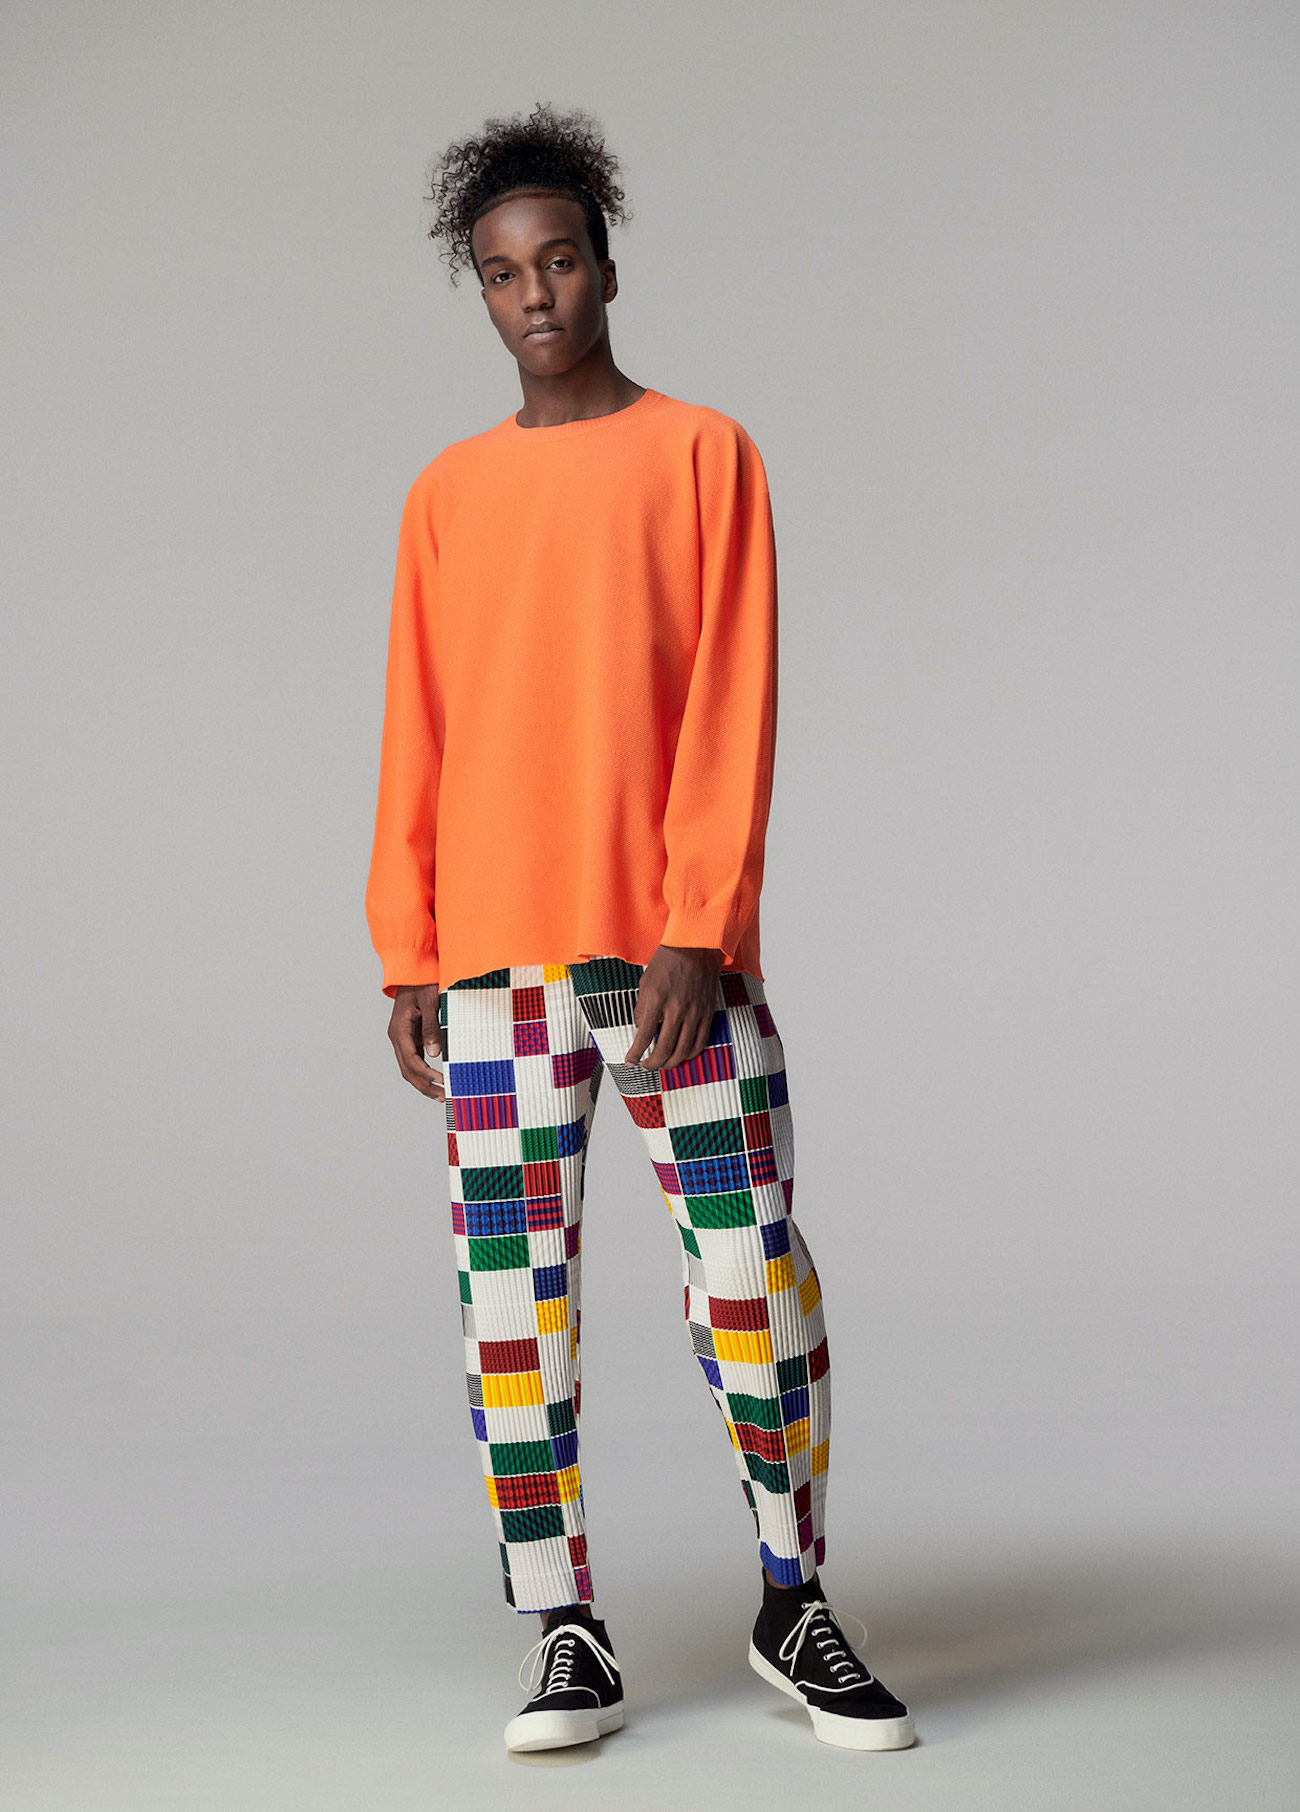 Homme Plissé Issey Miyake’s SS21 Collection - V Magazine